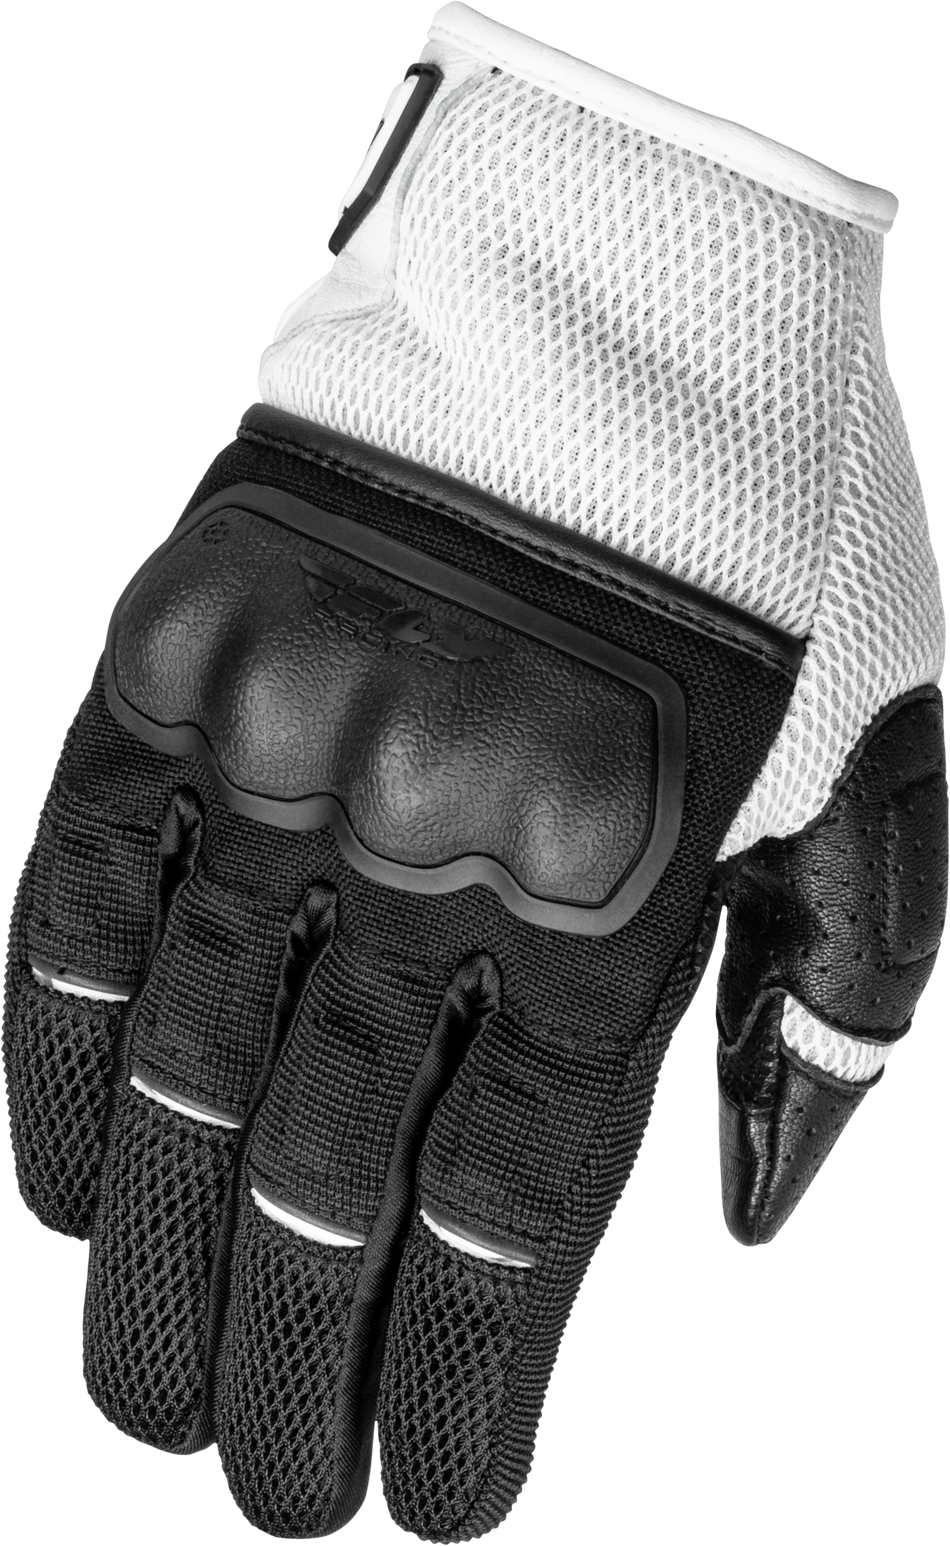 FLY RACING Women's Coolpro Force Gloves Black/White Xl 476-6301X